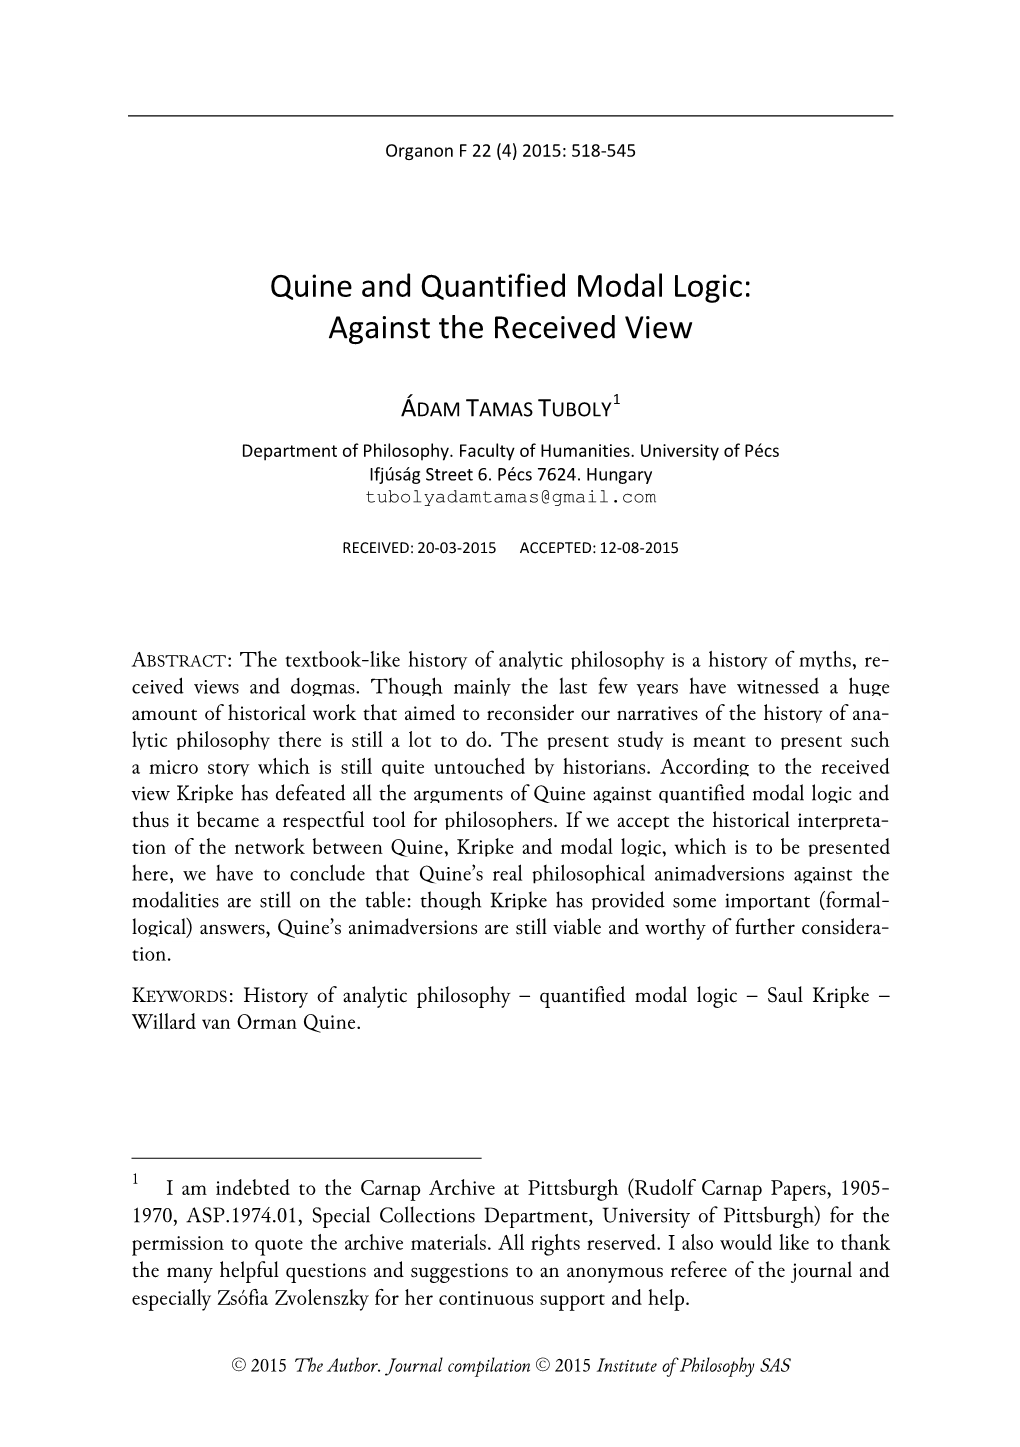 Quine and Quantified Modal Logic: Against the Received View